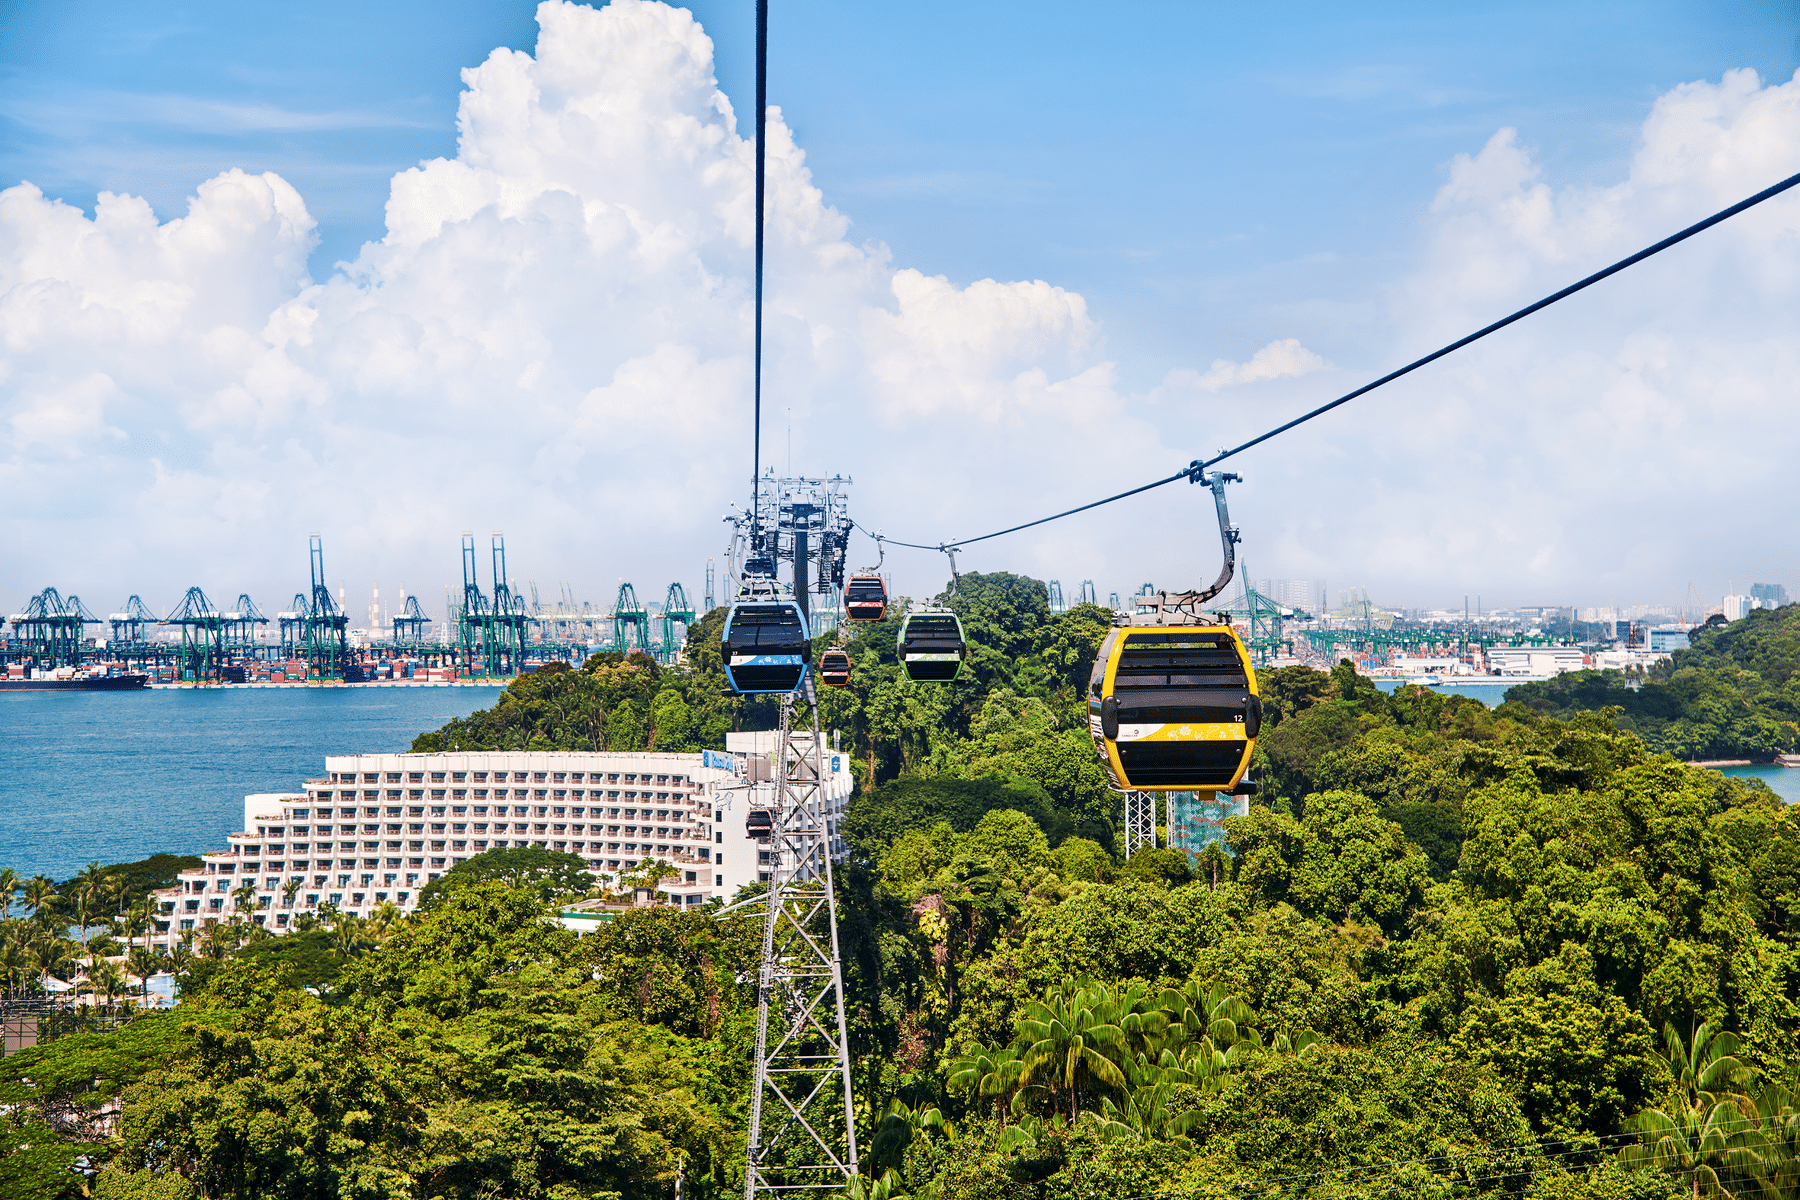 Soar above Singapore on the iconic cable car ride